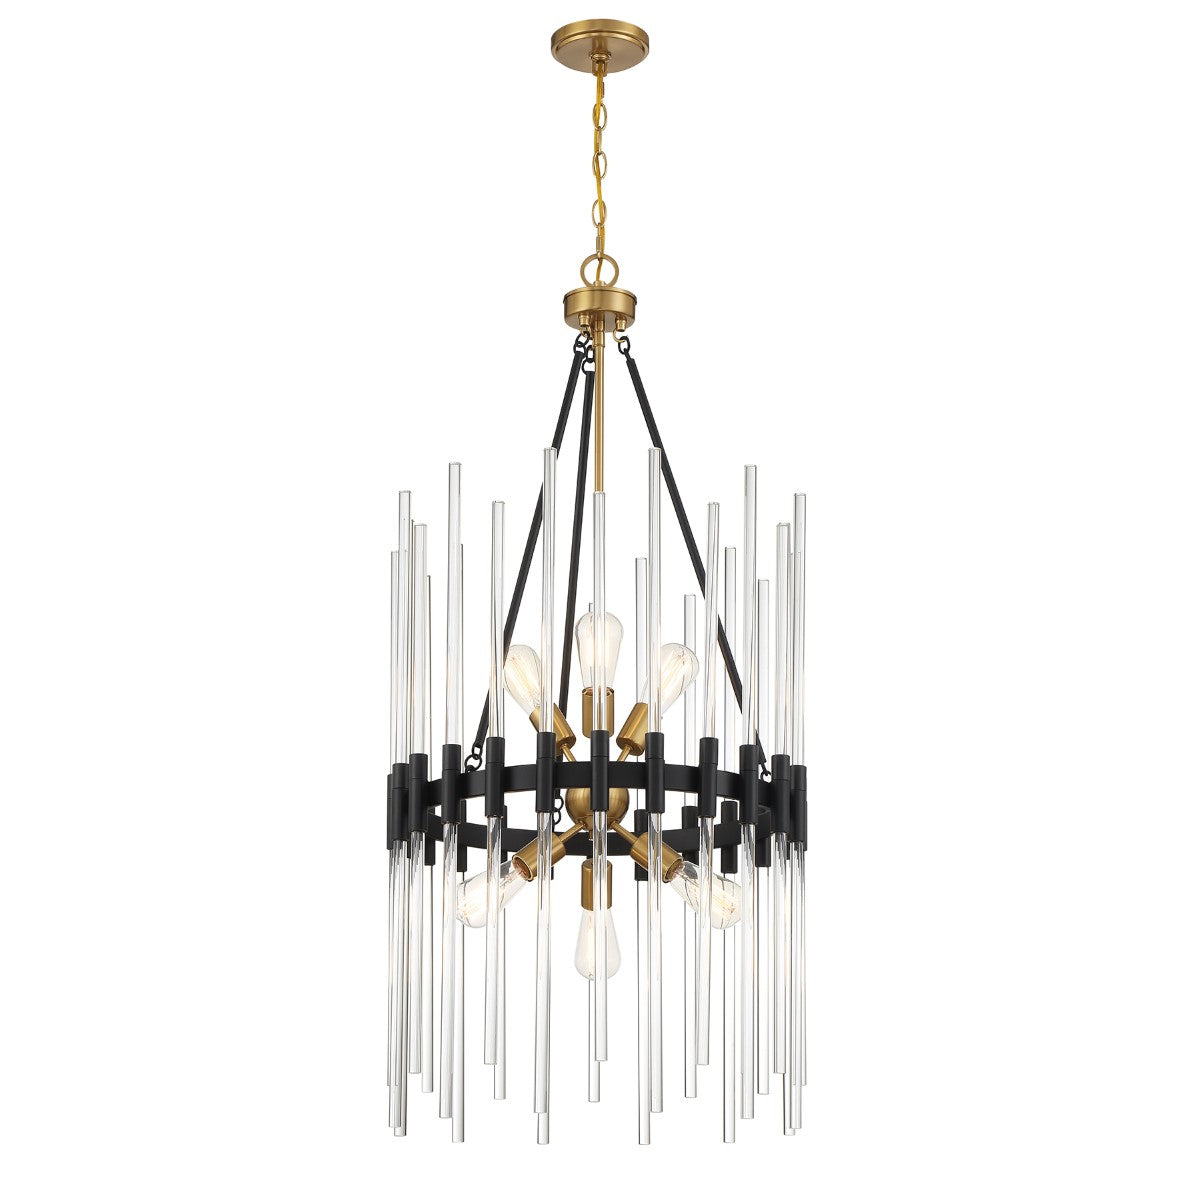 Santiago 20 in. 6 Lights Pendant Light Matte Black with Warm Brass Accents Finish